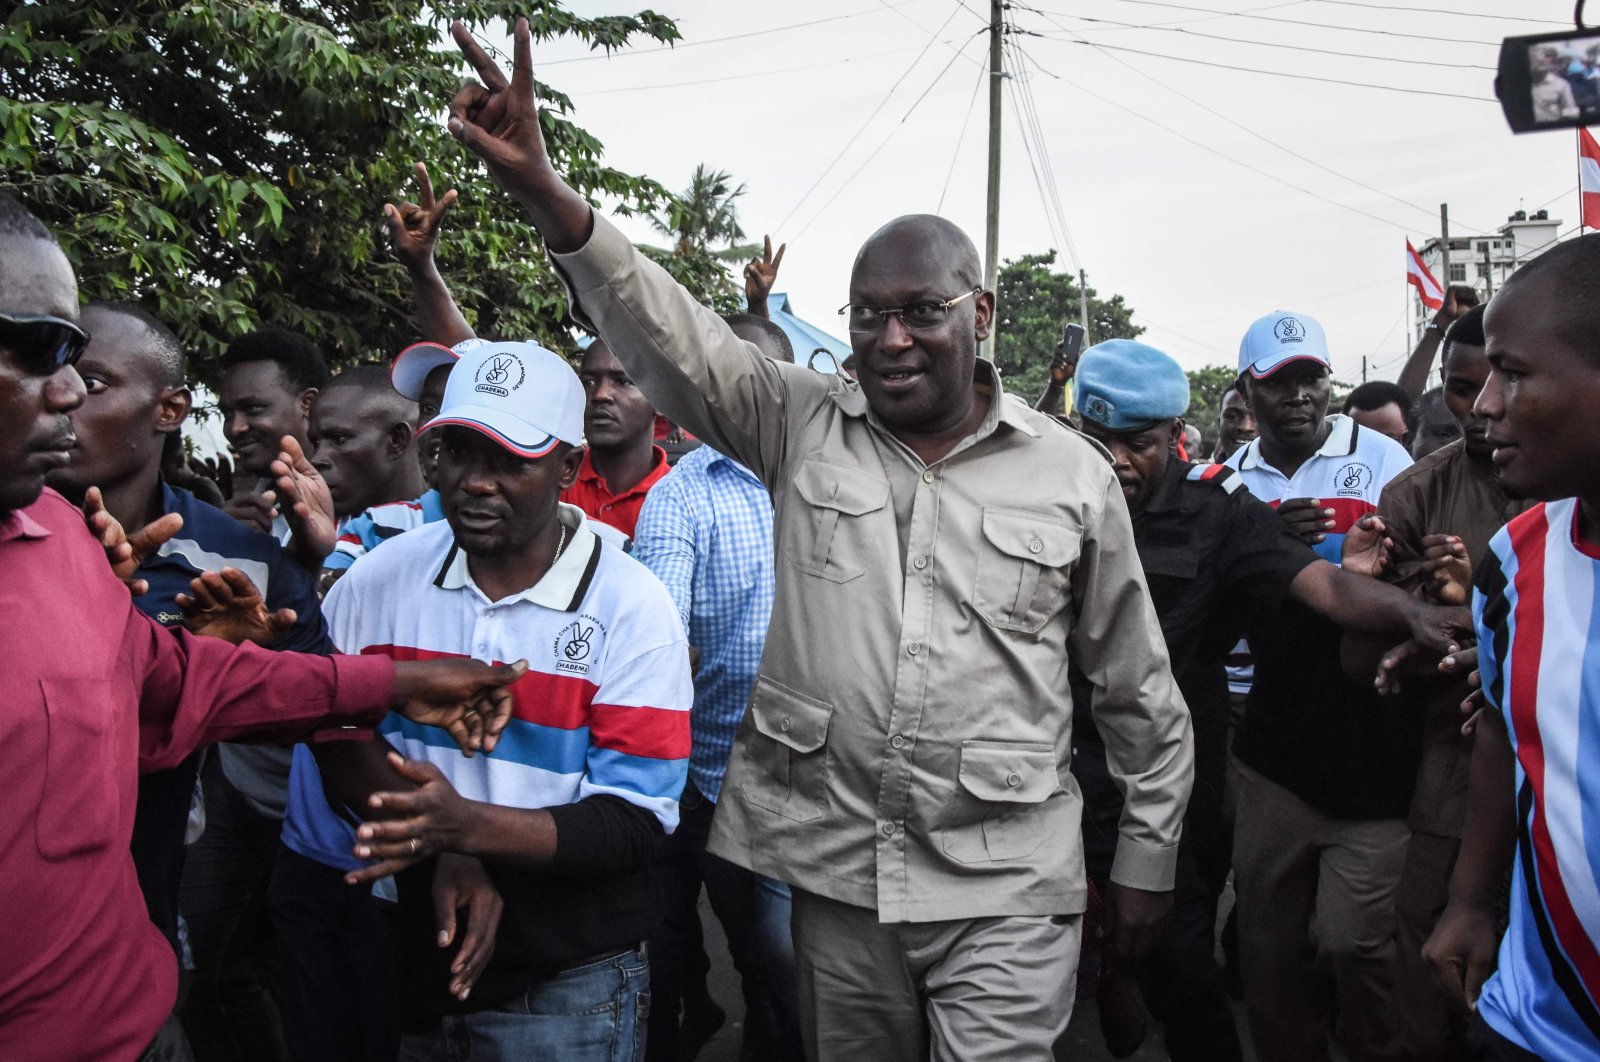 Tanzania Chadema party Chairman Freeman Mbowe (C) arrives at the party's headquarters after being released from Segerea prison in Dar es Salaam, Tanzania, March 14, 2020.  (AFP Photo)